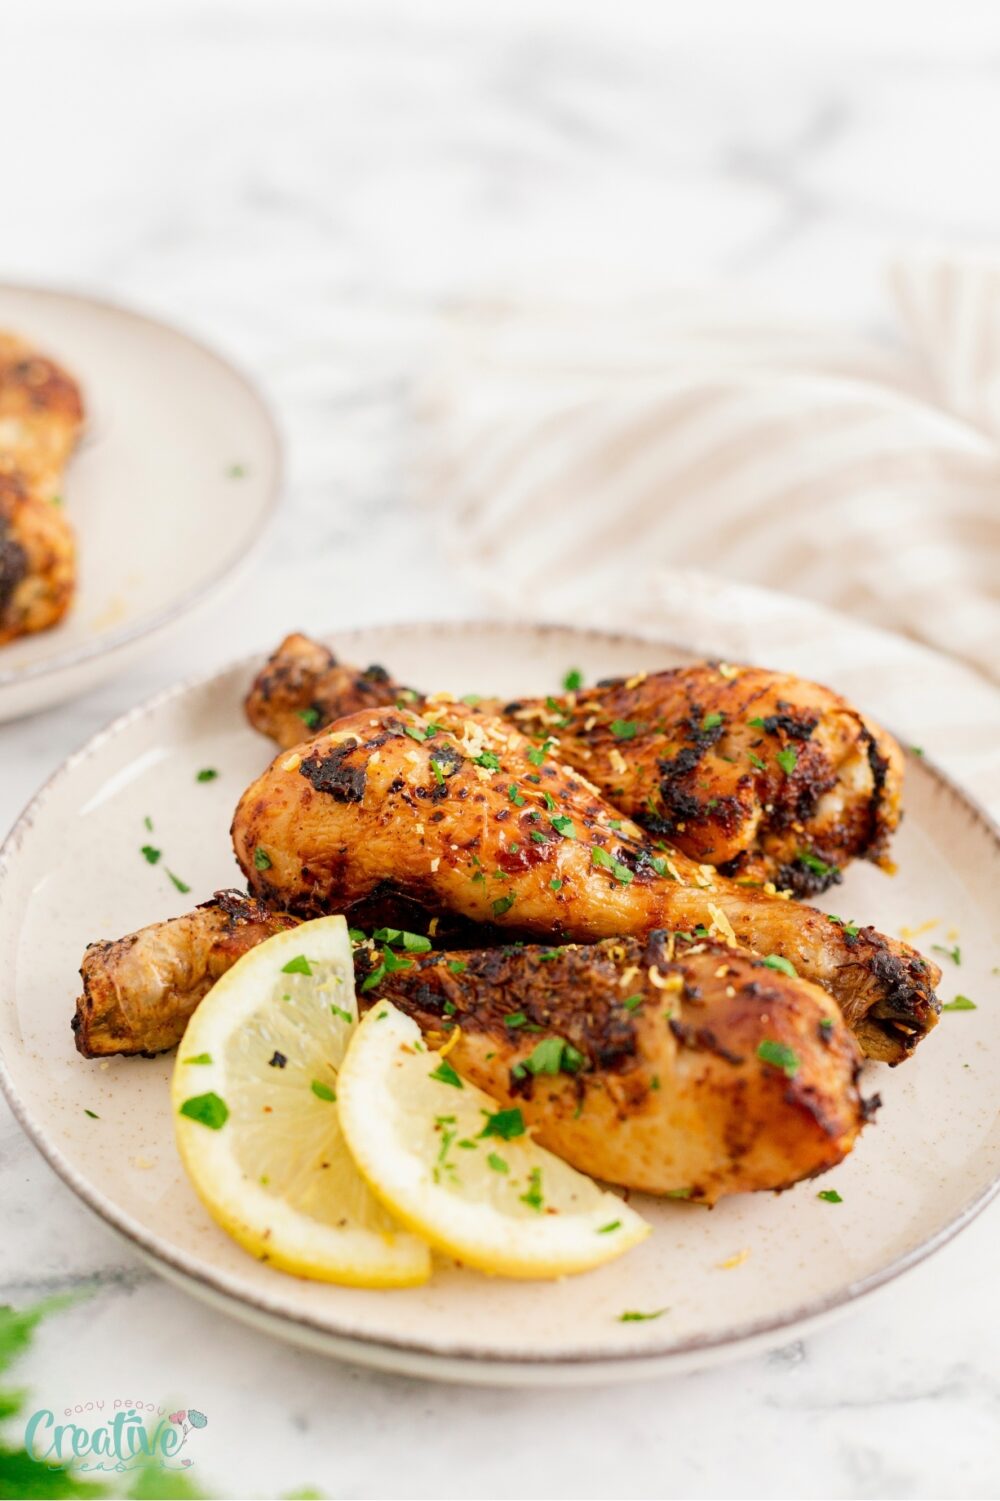 Delicious baked lemon chicken drumsticks - a perfect blend of zesty lemon and heartwarming chicken goodness!